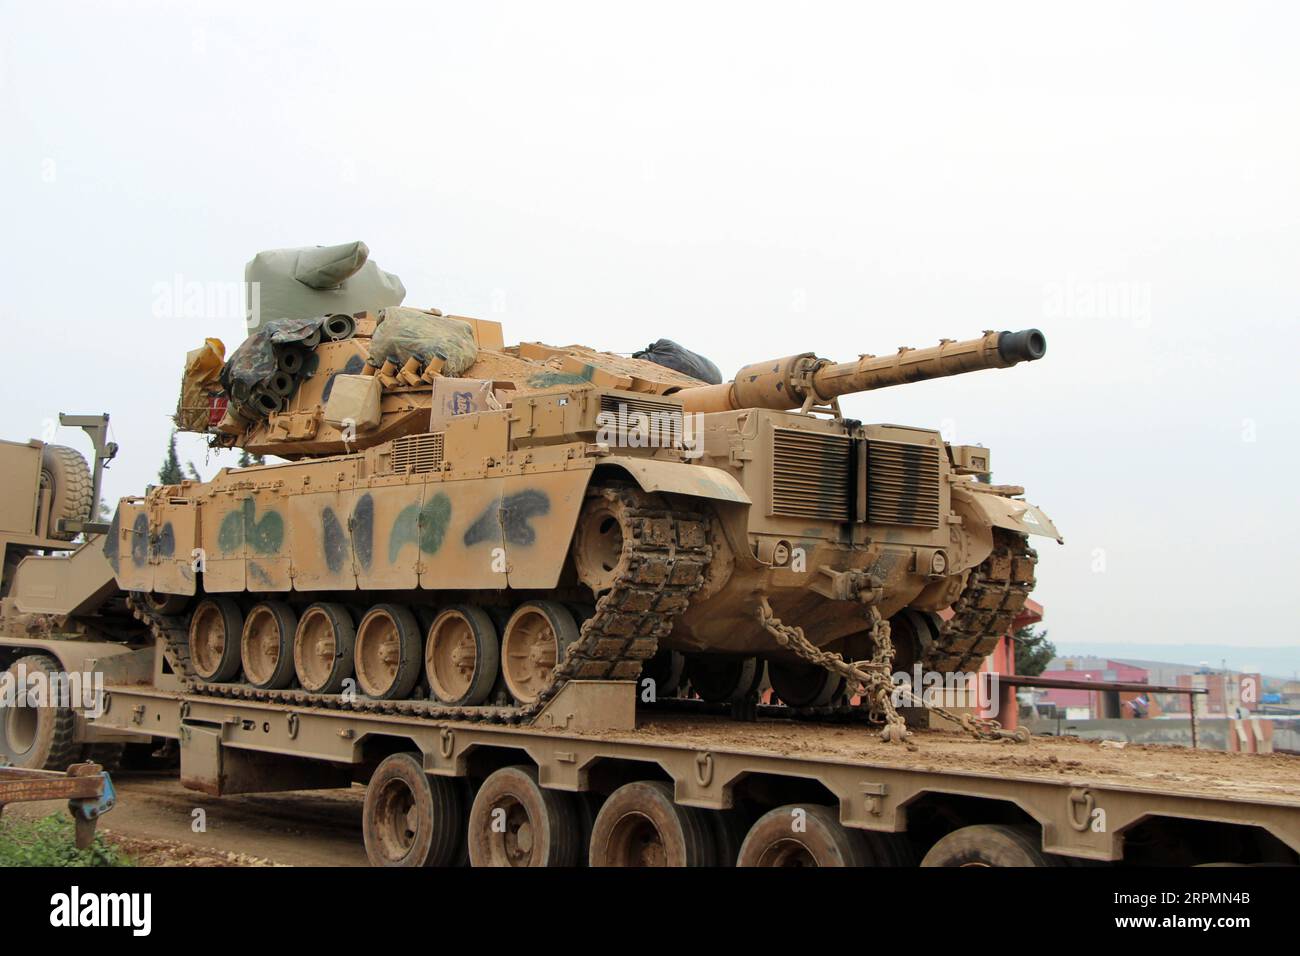 200214 -- ANKARA, Feb. 14, 2020 Xinhua -- A Turkish tank is seen in Reyhanli district of Hatay, Turkey, on Feb. 14, 2020. Turkey has poured in the last few days thousands of troops and convoys of military vehicles across the border, including tanks, armored personnel carriers and radar equipment in order to bolster its 12 observation posts. Photo by Mustafa Kaya/Xinhua TURKEY-HATAY-SYRIAN BORDER-MILITARY PRESENCE-INCREASING PUBLICATIONxNOTxINxCHN Stock Photo